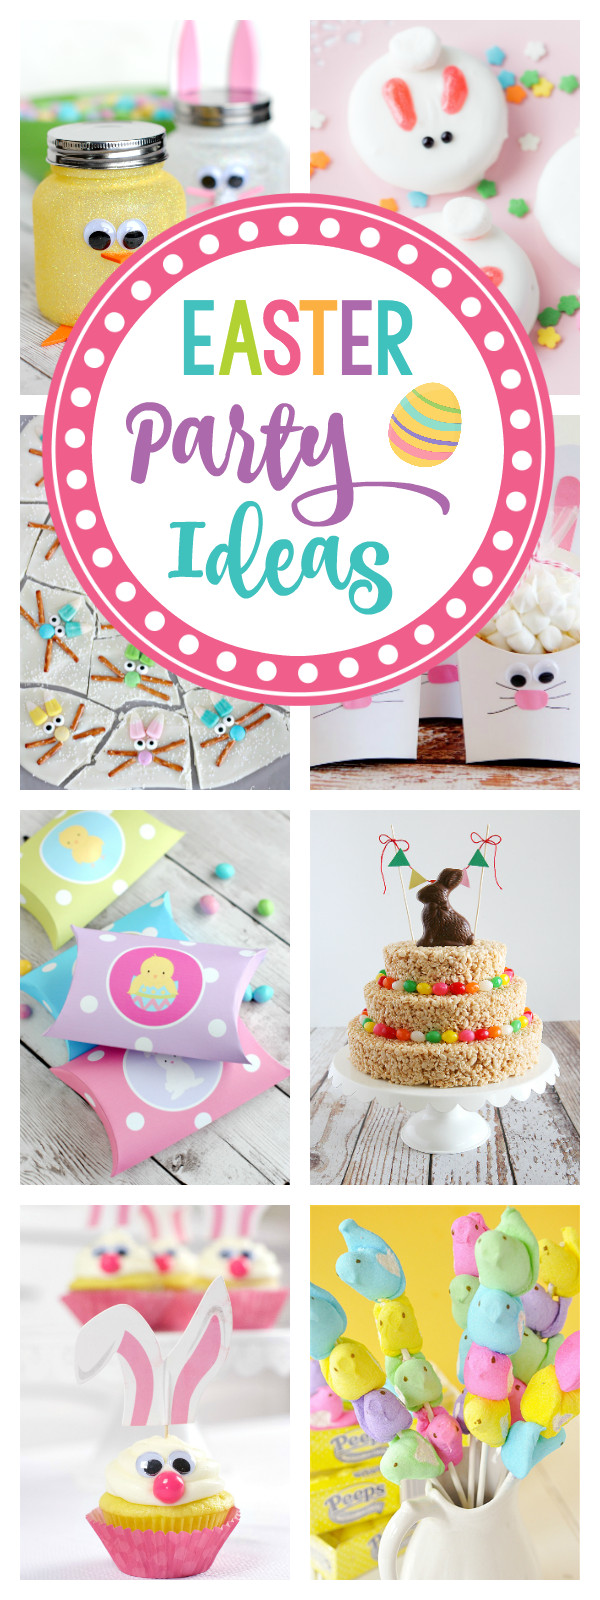 Easter Party Food Ideas Pinterest
 25 Fun Easter Party Ideas for Kids – Fun Squared